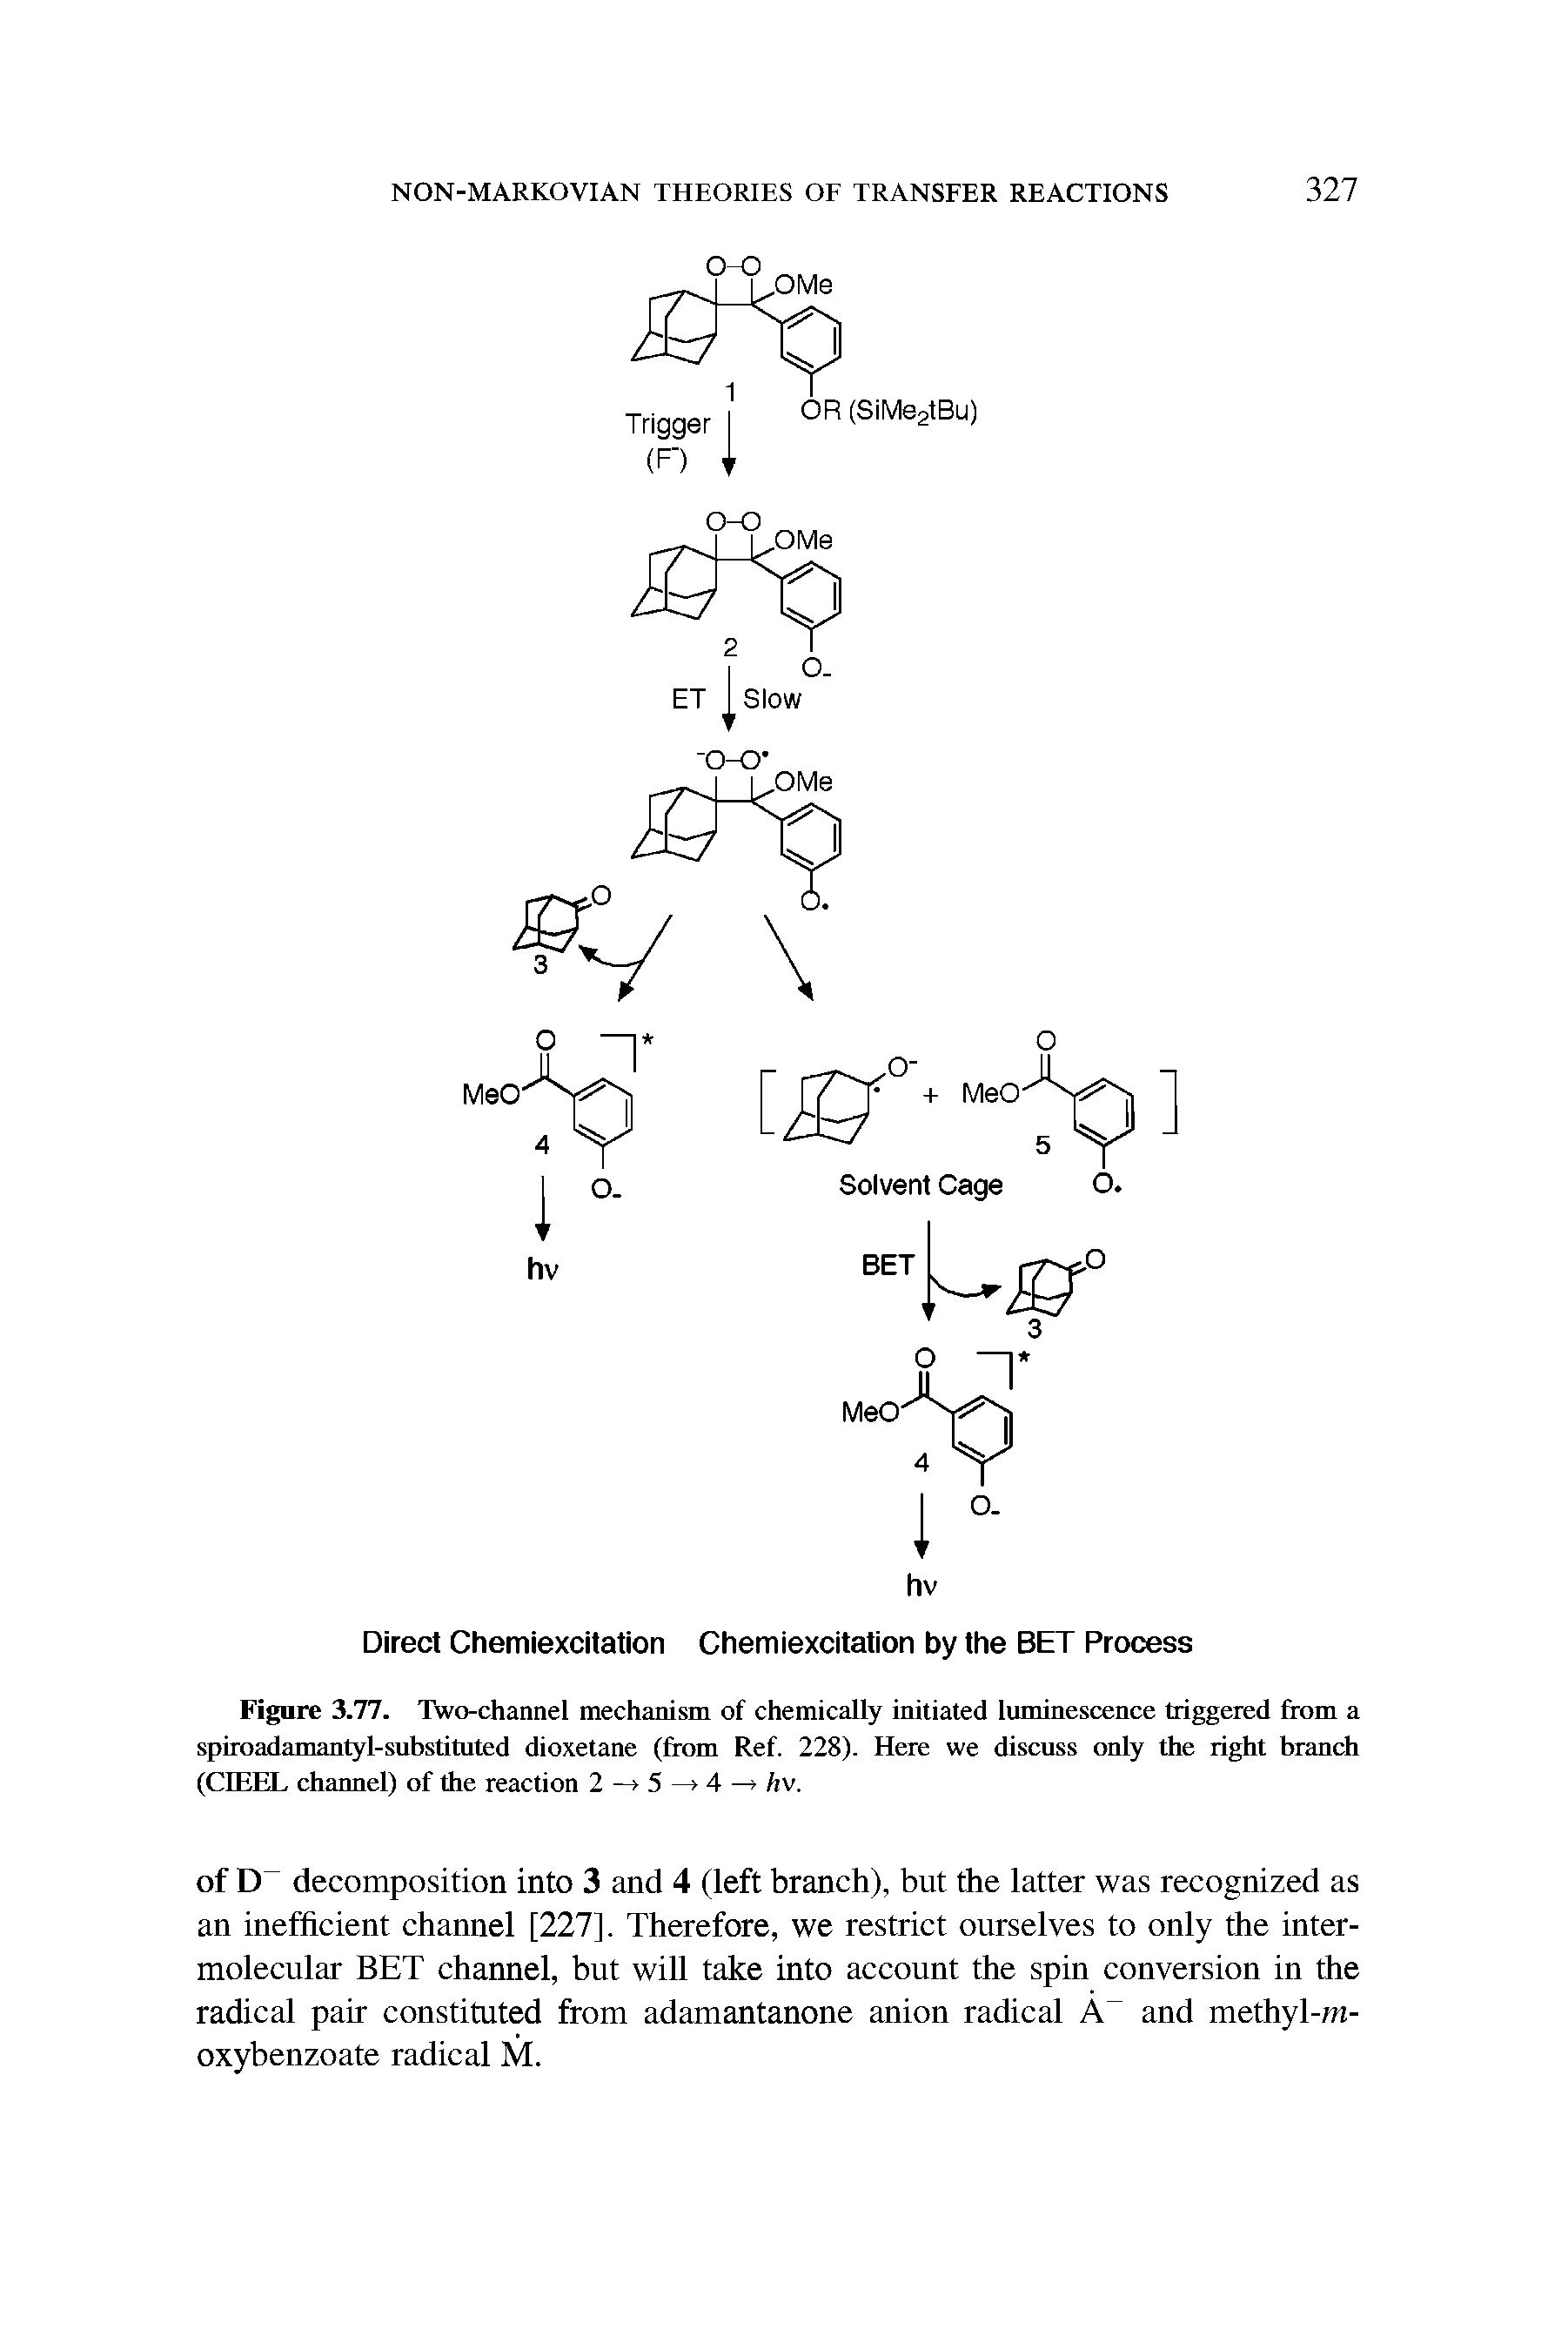 Figure 3.77. Two-channel mechanism of chemically initiated luminescence triggered from a spiroadamantyl-substituted dioxetane (from Ref. 228). Here we discuss only the right branch (CIEEL channel) of the reaction 2 - 5 - 4 hv.